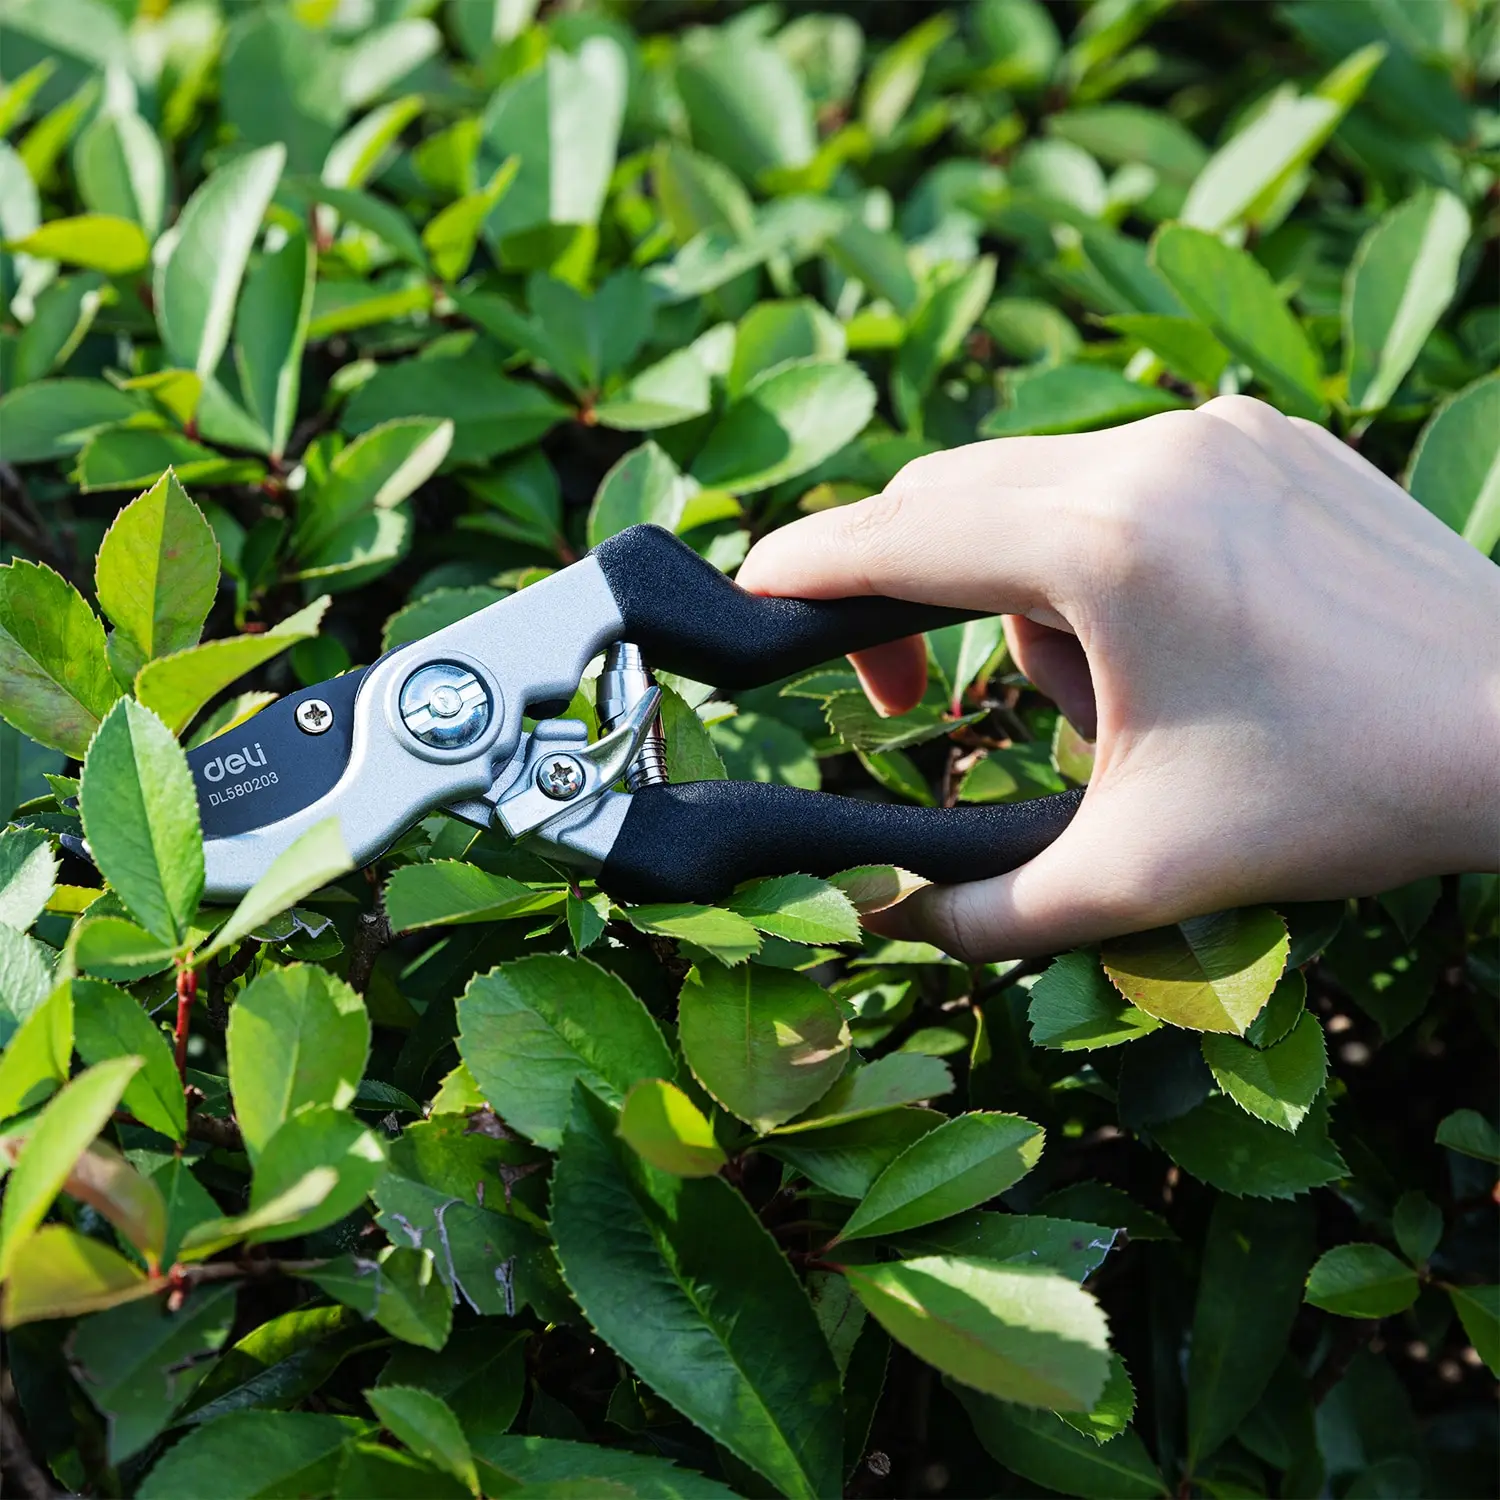 gonicc 8.5 inch Professional Rotating Bypass Titanium Coated Pruning Shears(GPPS-1014), Secateurs, Scissors, Pruners with Heavy Duty SK5 Blade. Soft